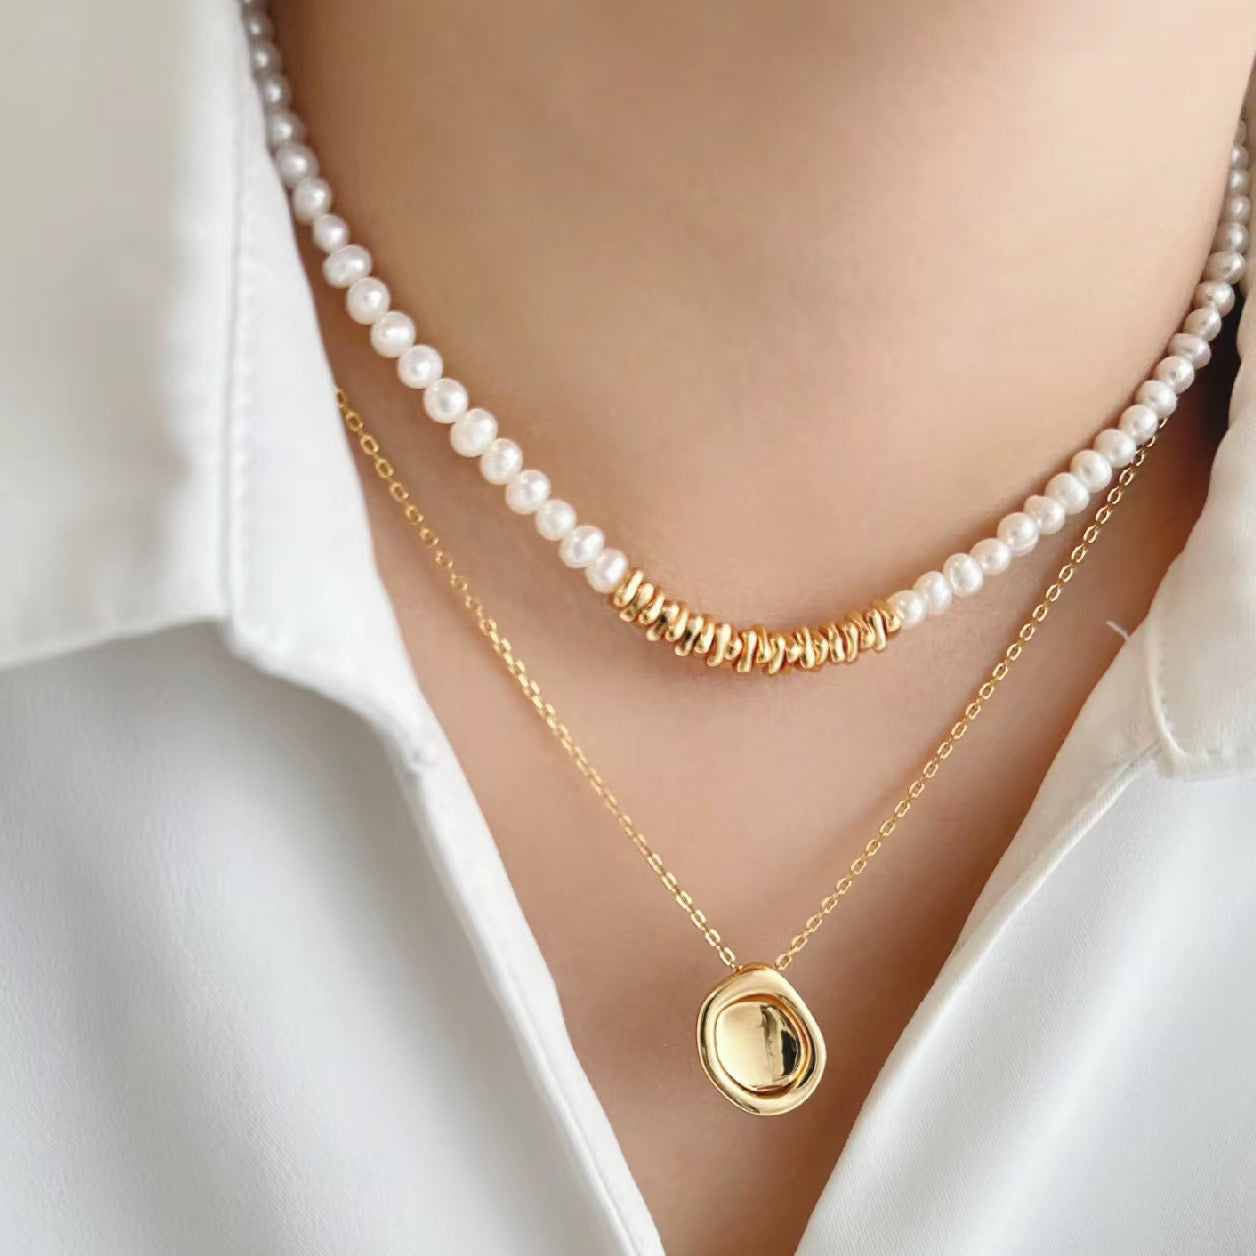 Pearl Necklace with Oval Silver Pendant